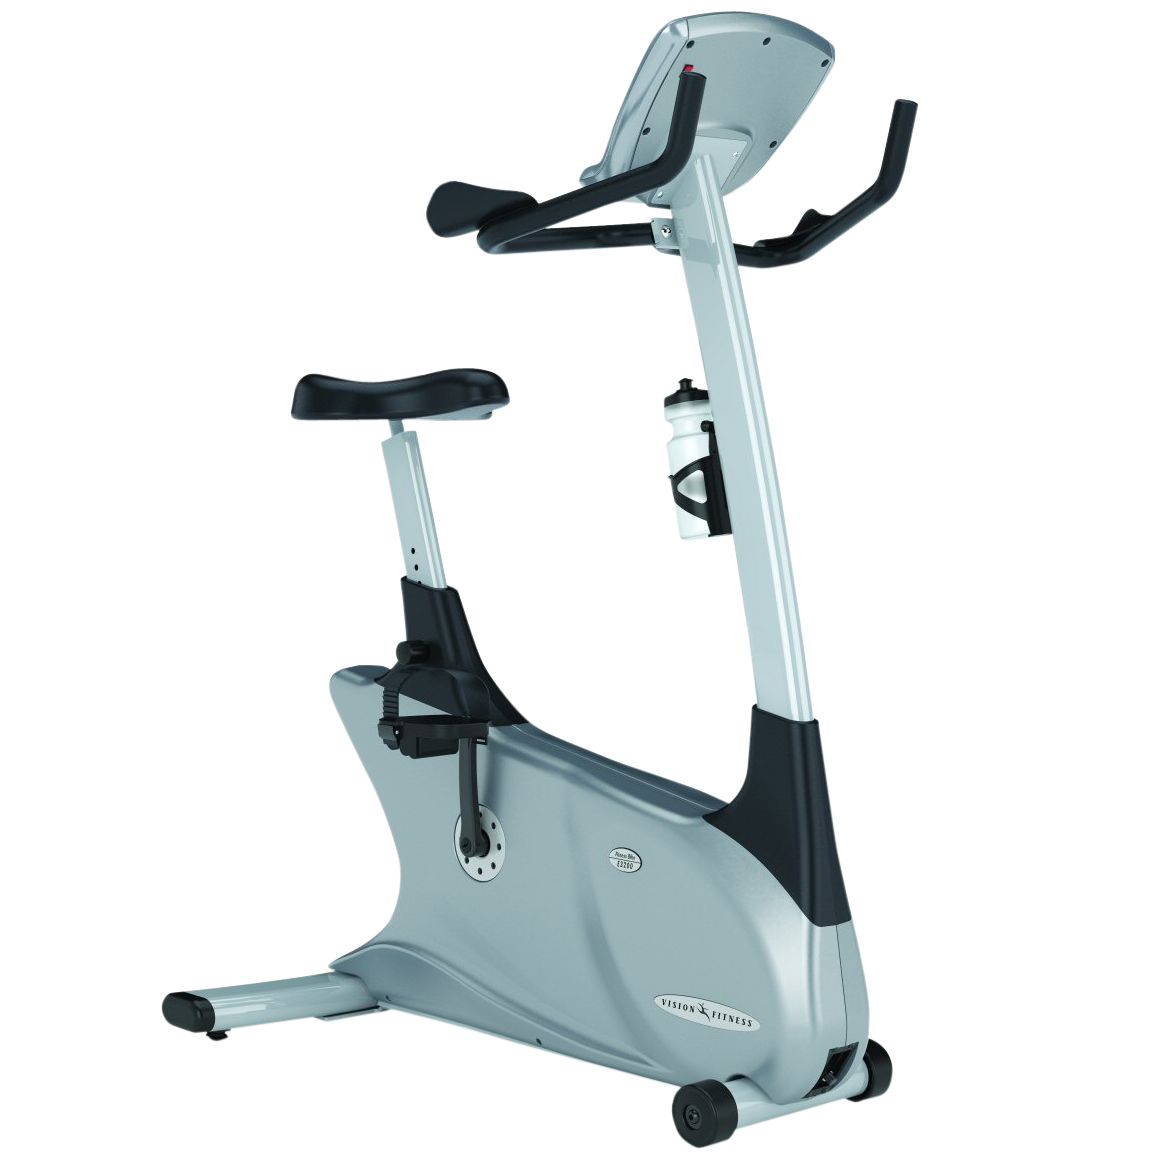 Vision Fitness E3200 Upright Exercise Bike with Deluxe Console at John Lewis